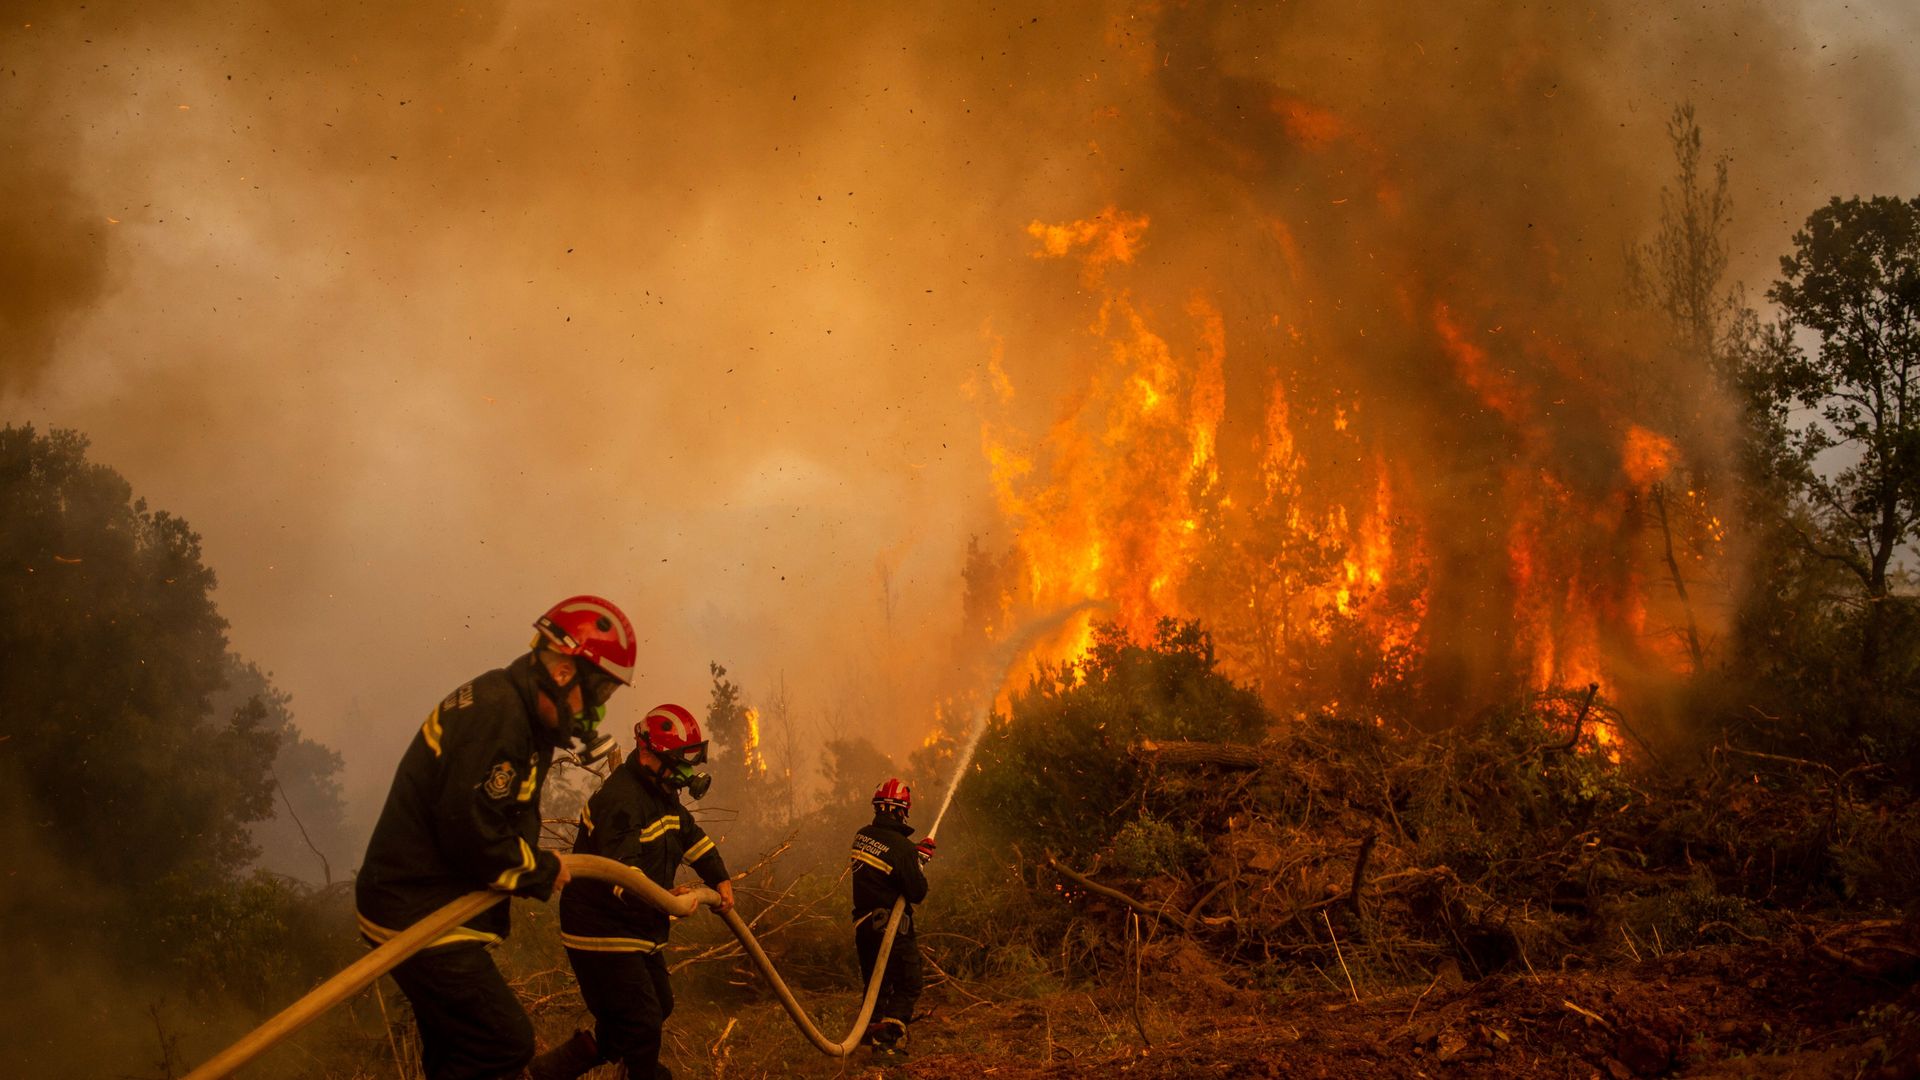 firefighters use a water hose to extinguish the burning blaze of a forest fire 